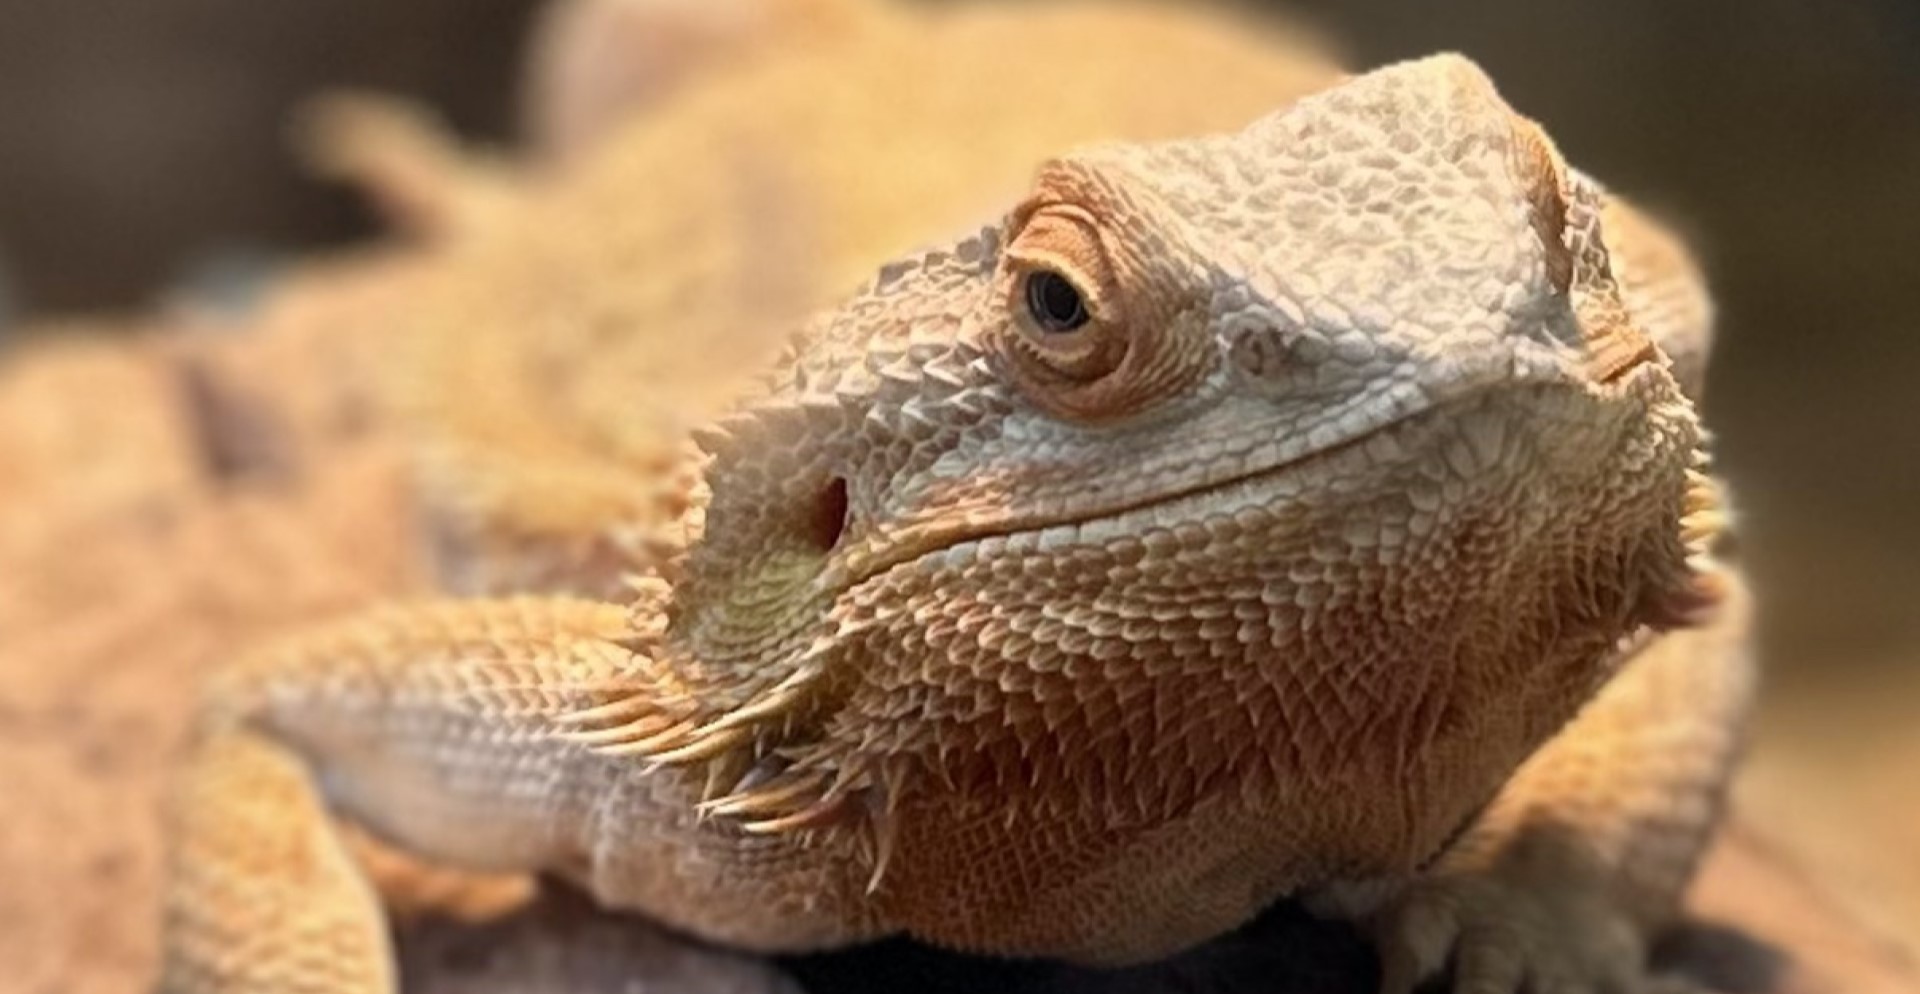 Reptile Festival will feature a wide variety of live reptiles!